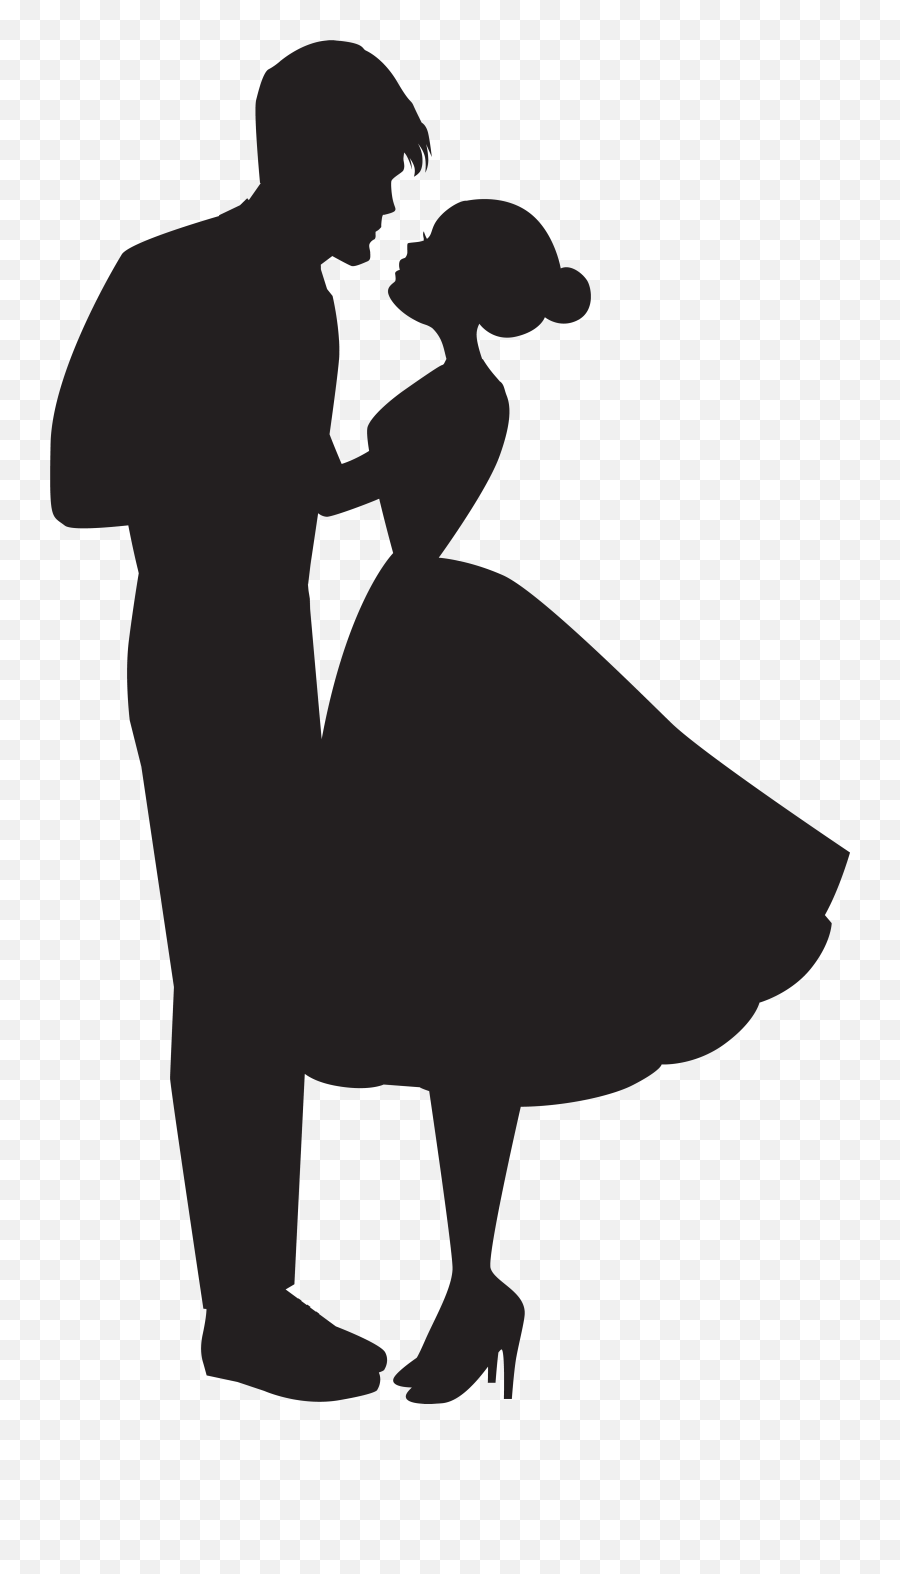 Free Couple Holding Hands Silhouette Download Free Clip Art - Romantic Couple Dancing Silhouette Emoji,Gay Couple Emoji